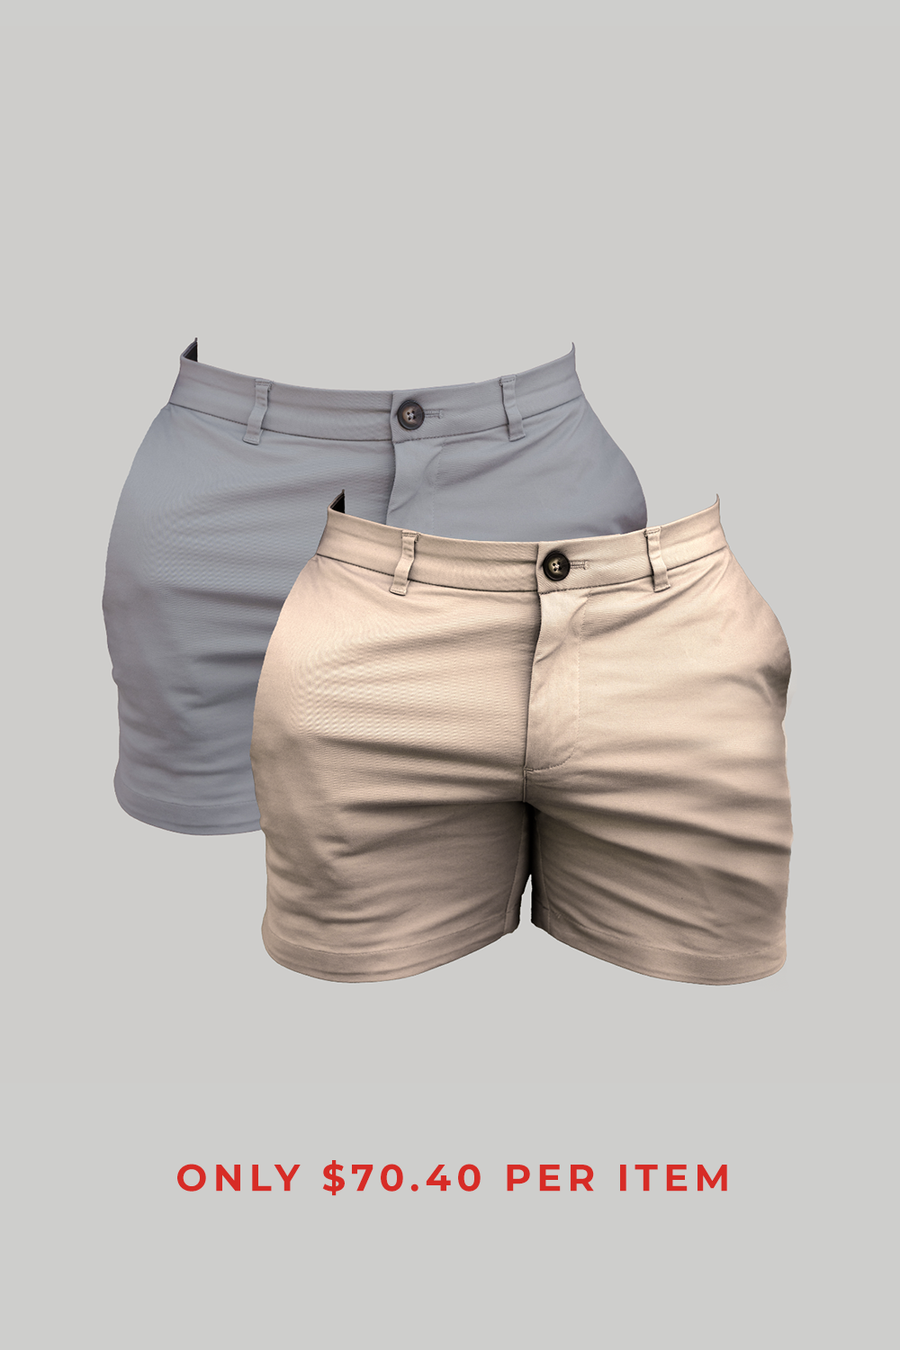 Athletic Fit Chino Shorts - Shorter Length 2-Pack - TAILORED ATHLETE - USA